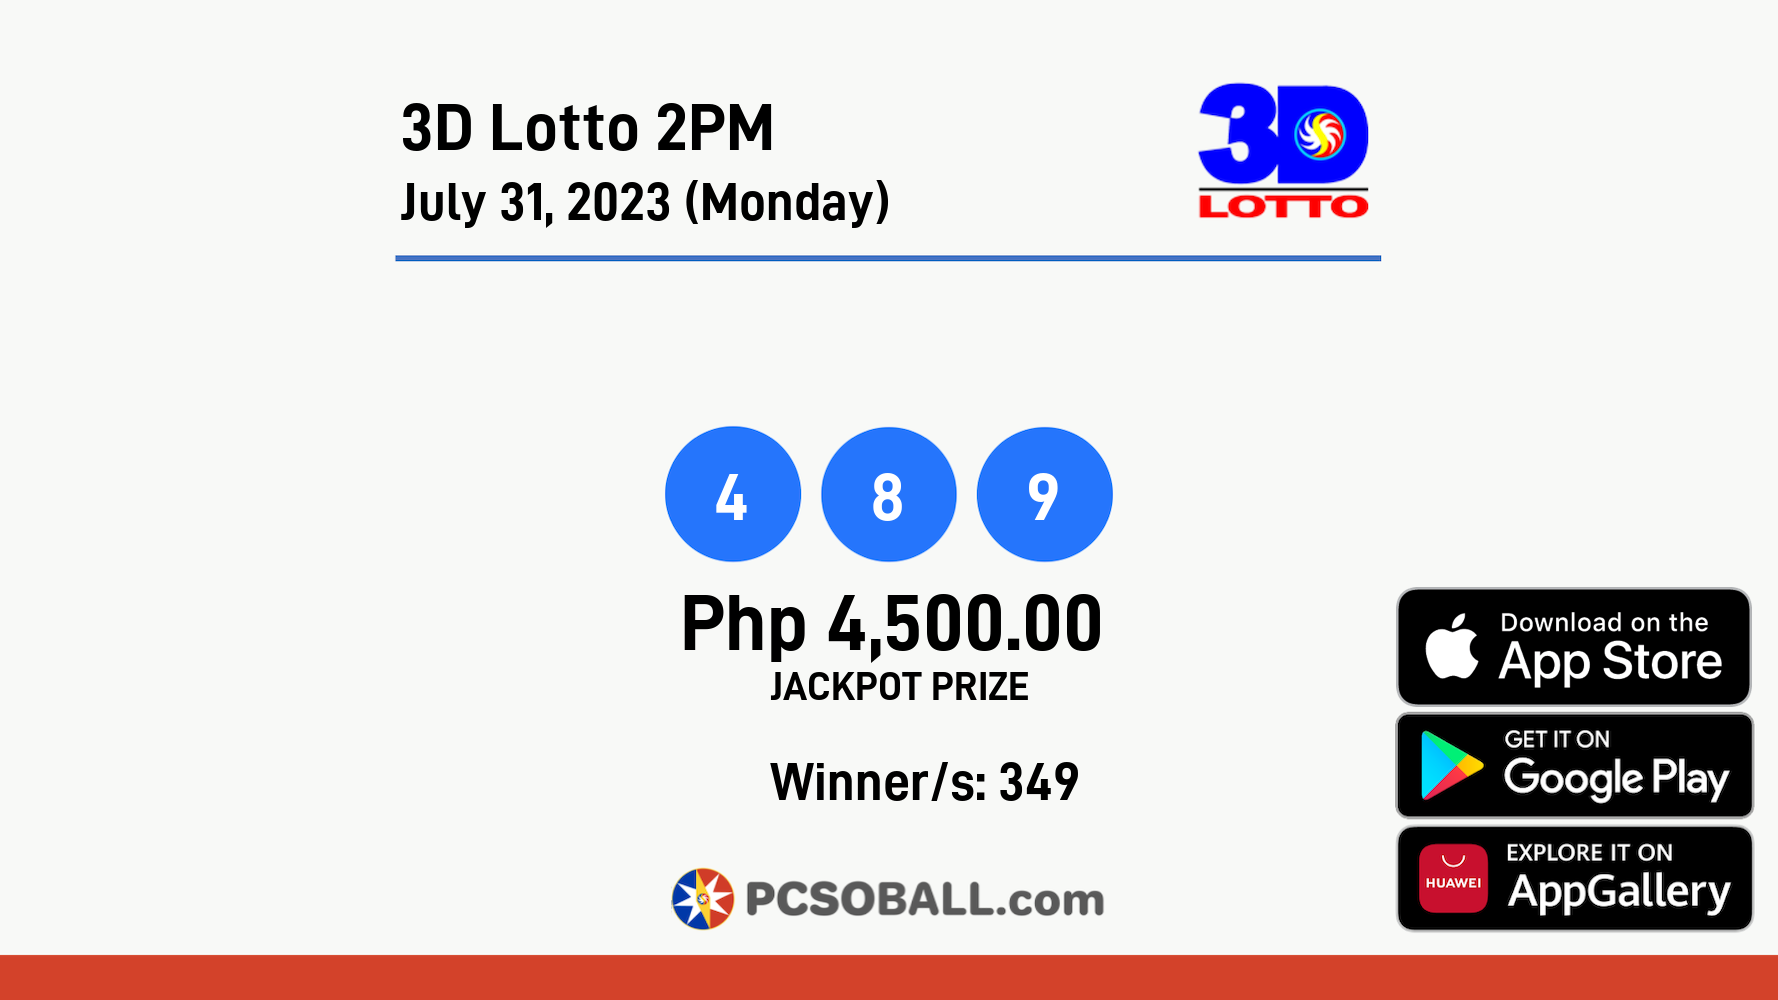 3D Lotto 2PM July 31, 2023 (Monday) Result